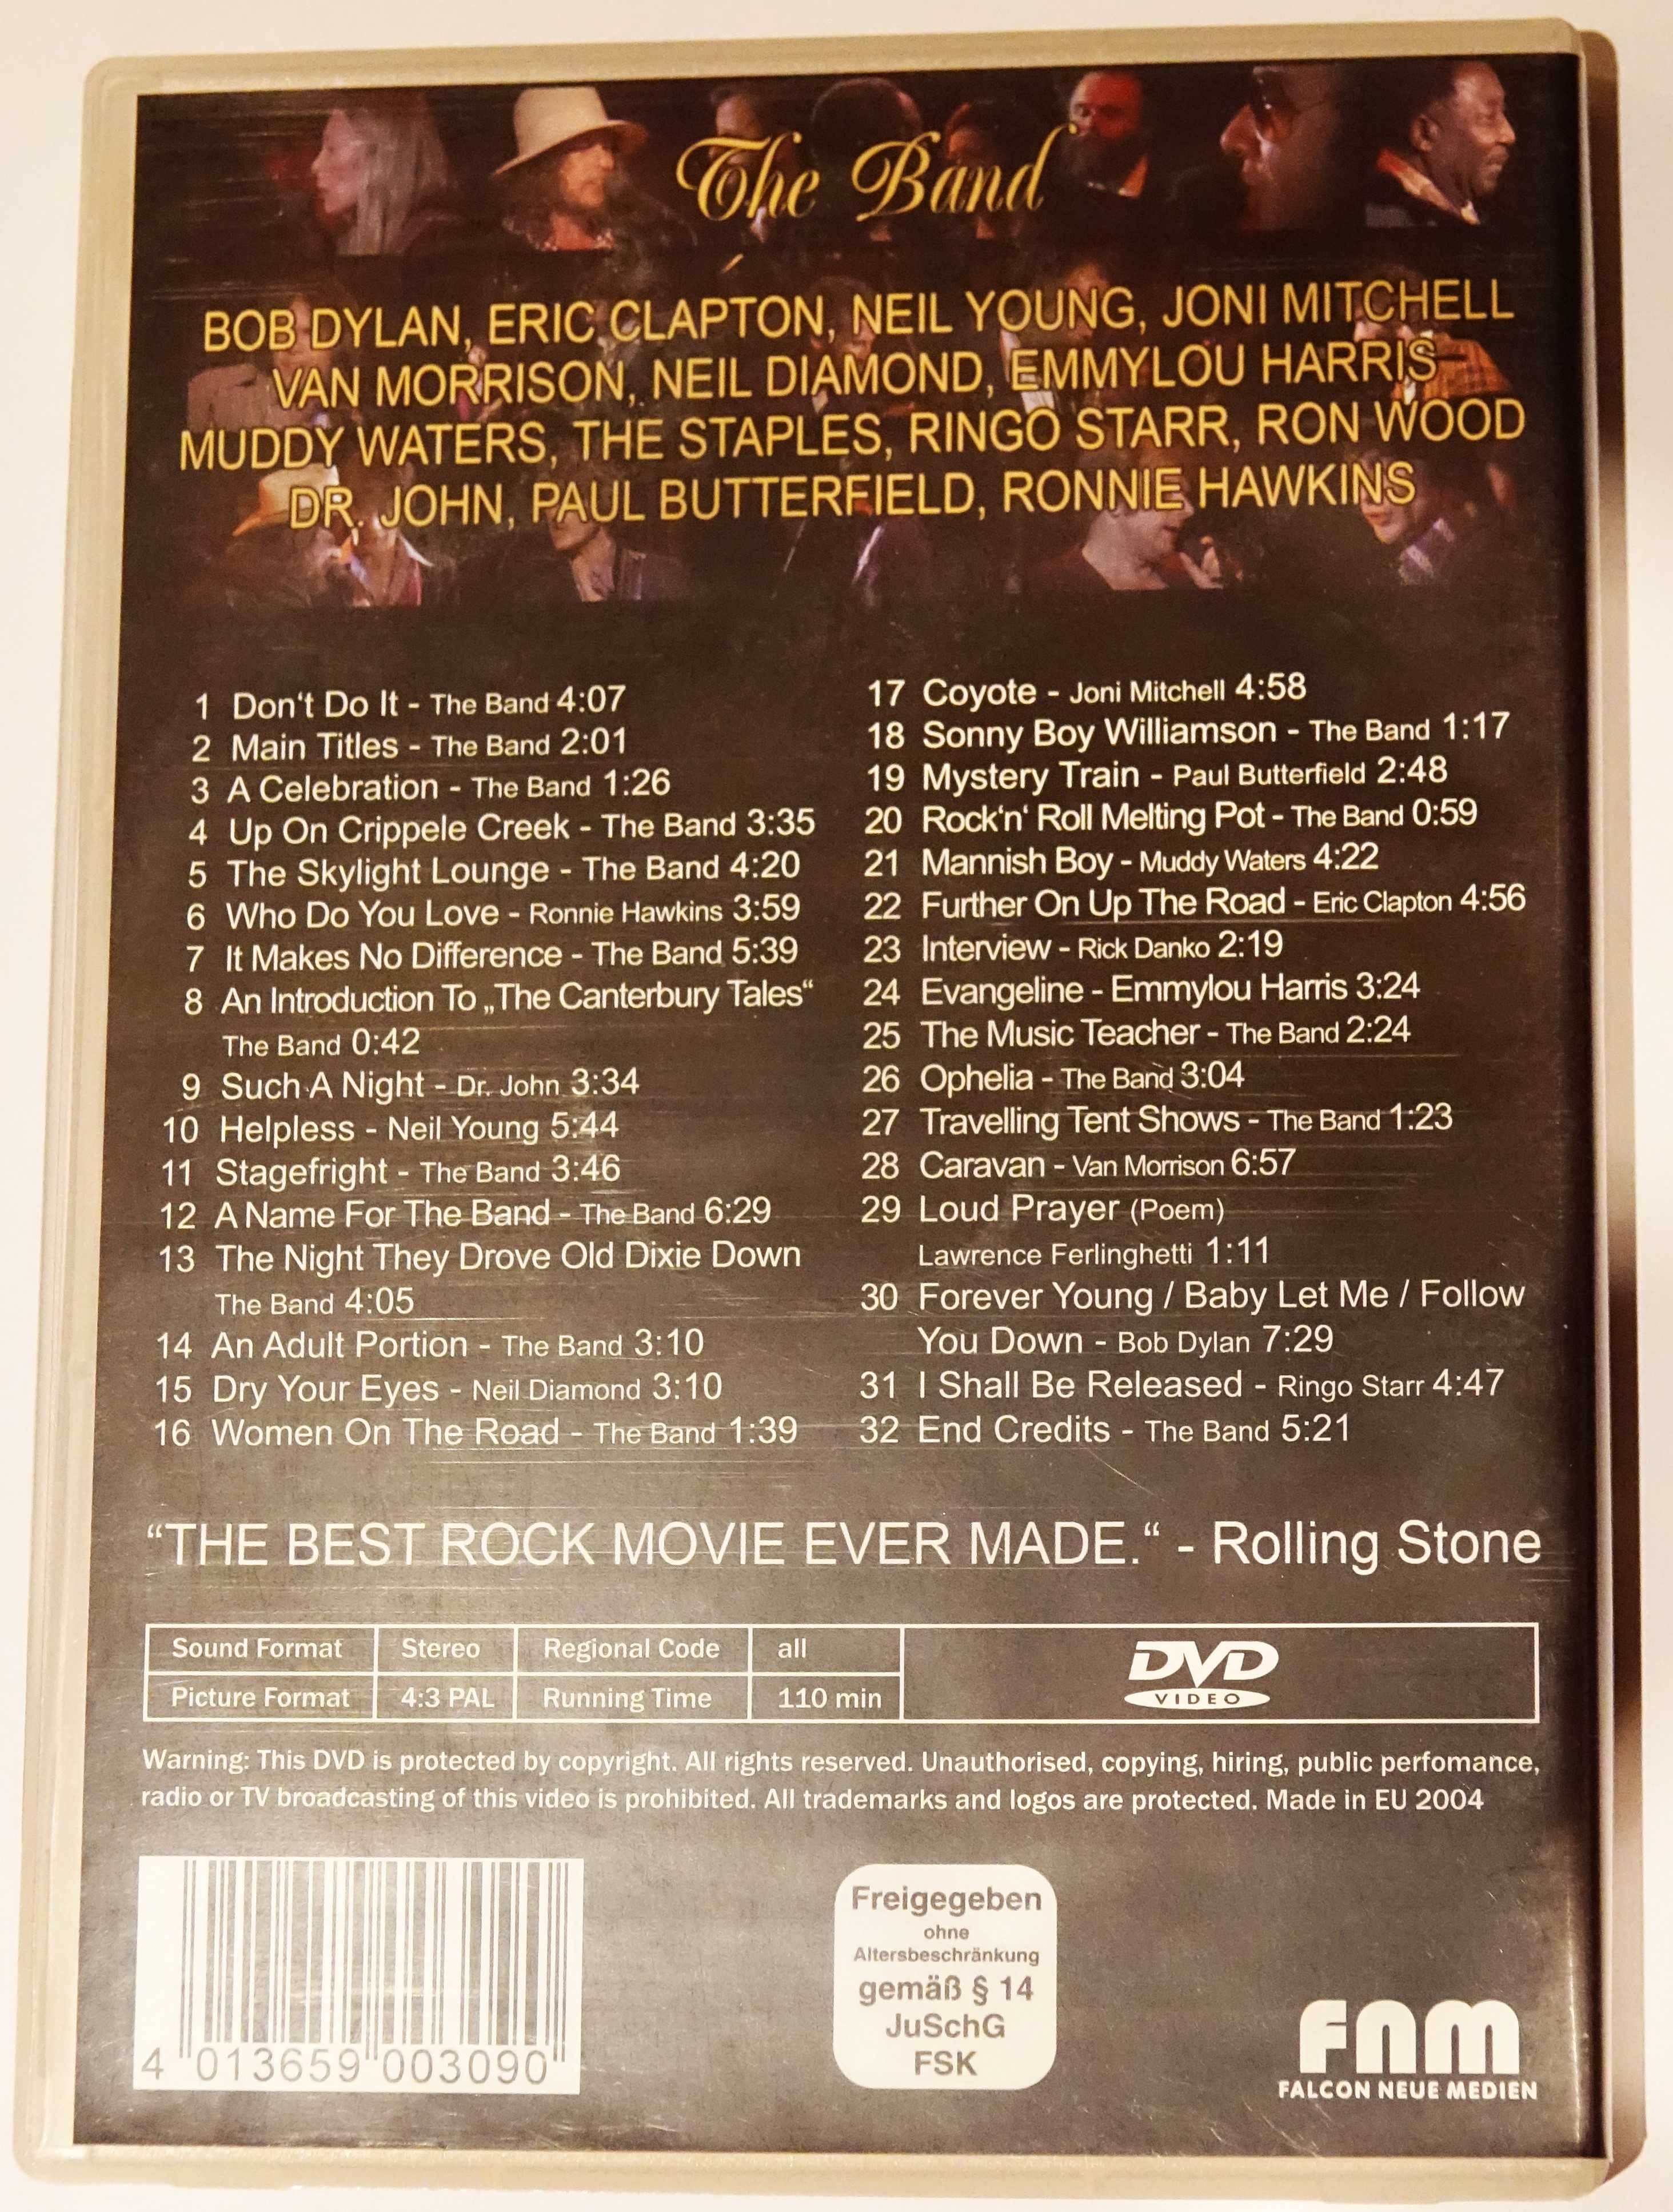 The Band - The Last Waltz (DVD)